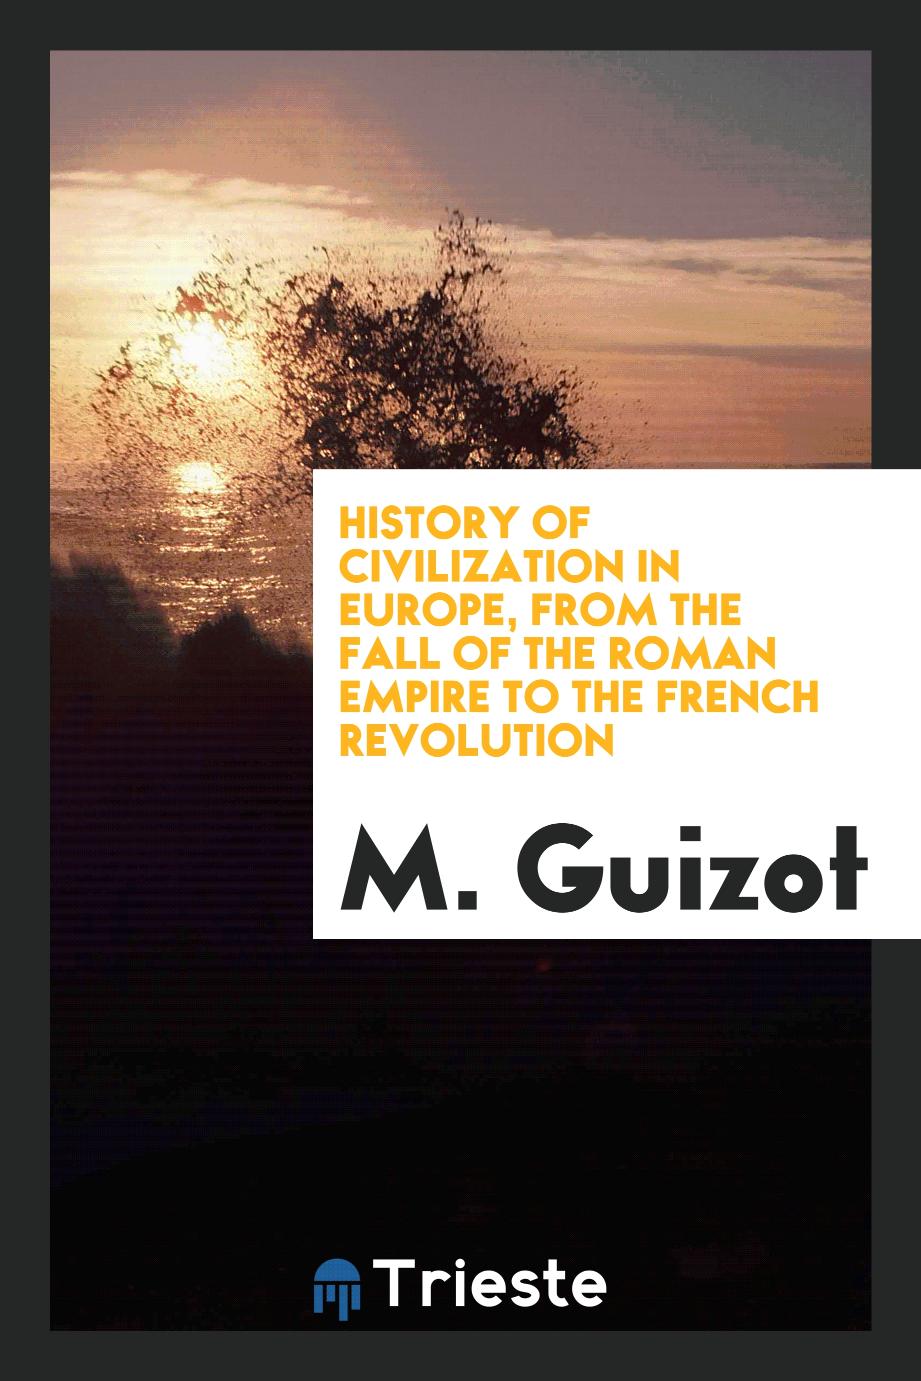 History of civilization in Europe, from the fall of the Roman empire to the French revolution